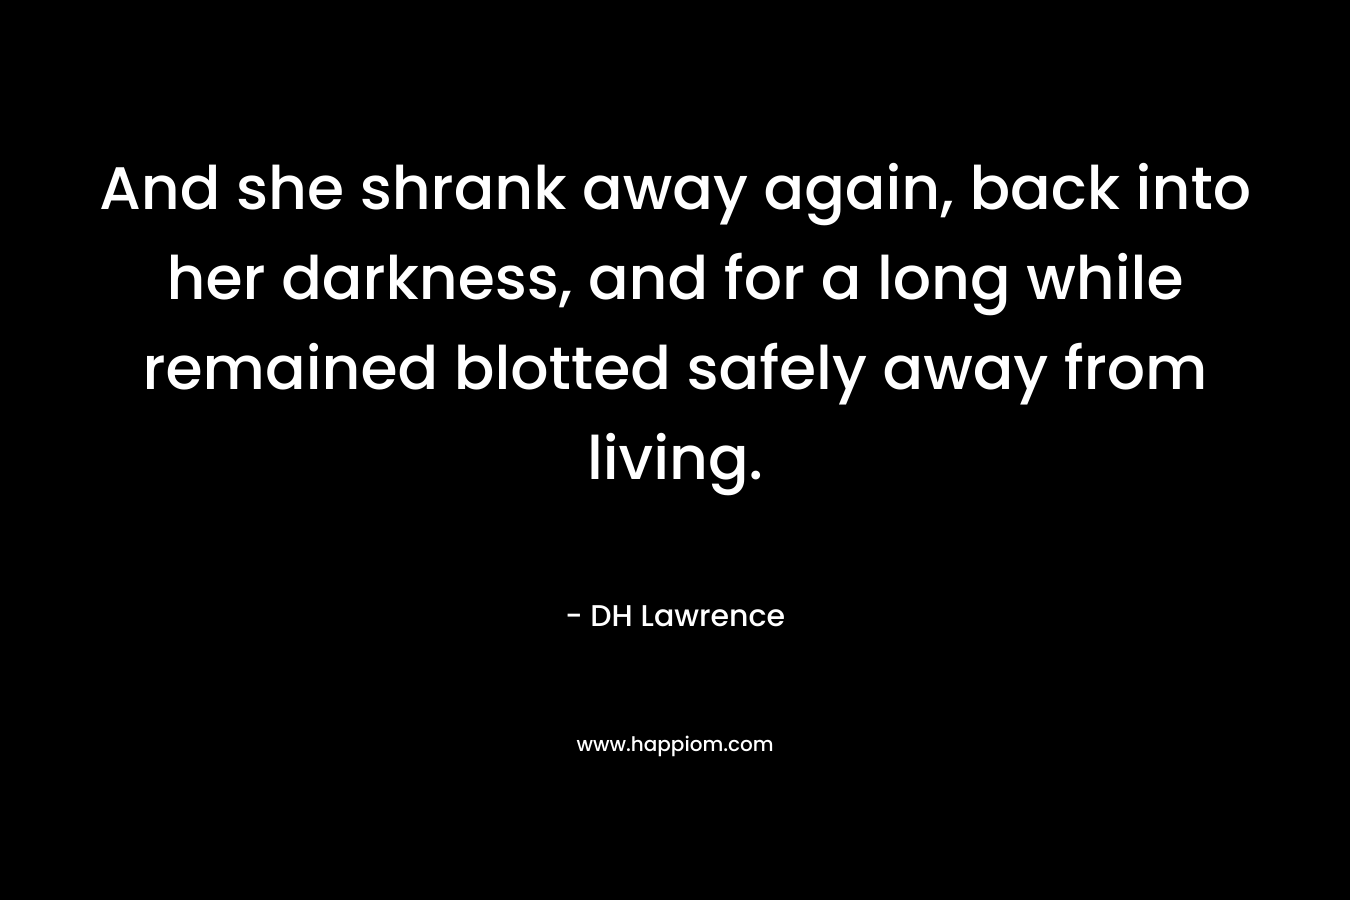 And she shrank away again, back into her darkness, and for a long while remained blotted safely away from living. – DH Lawrence